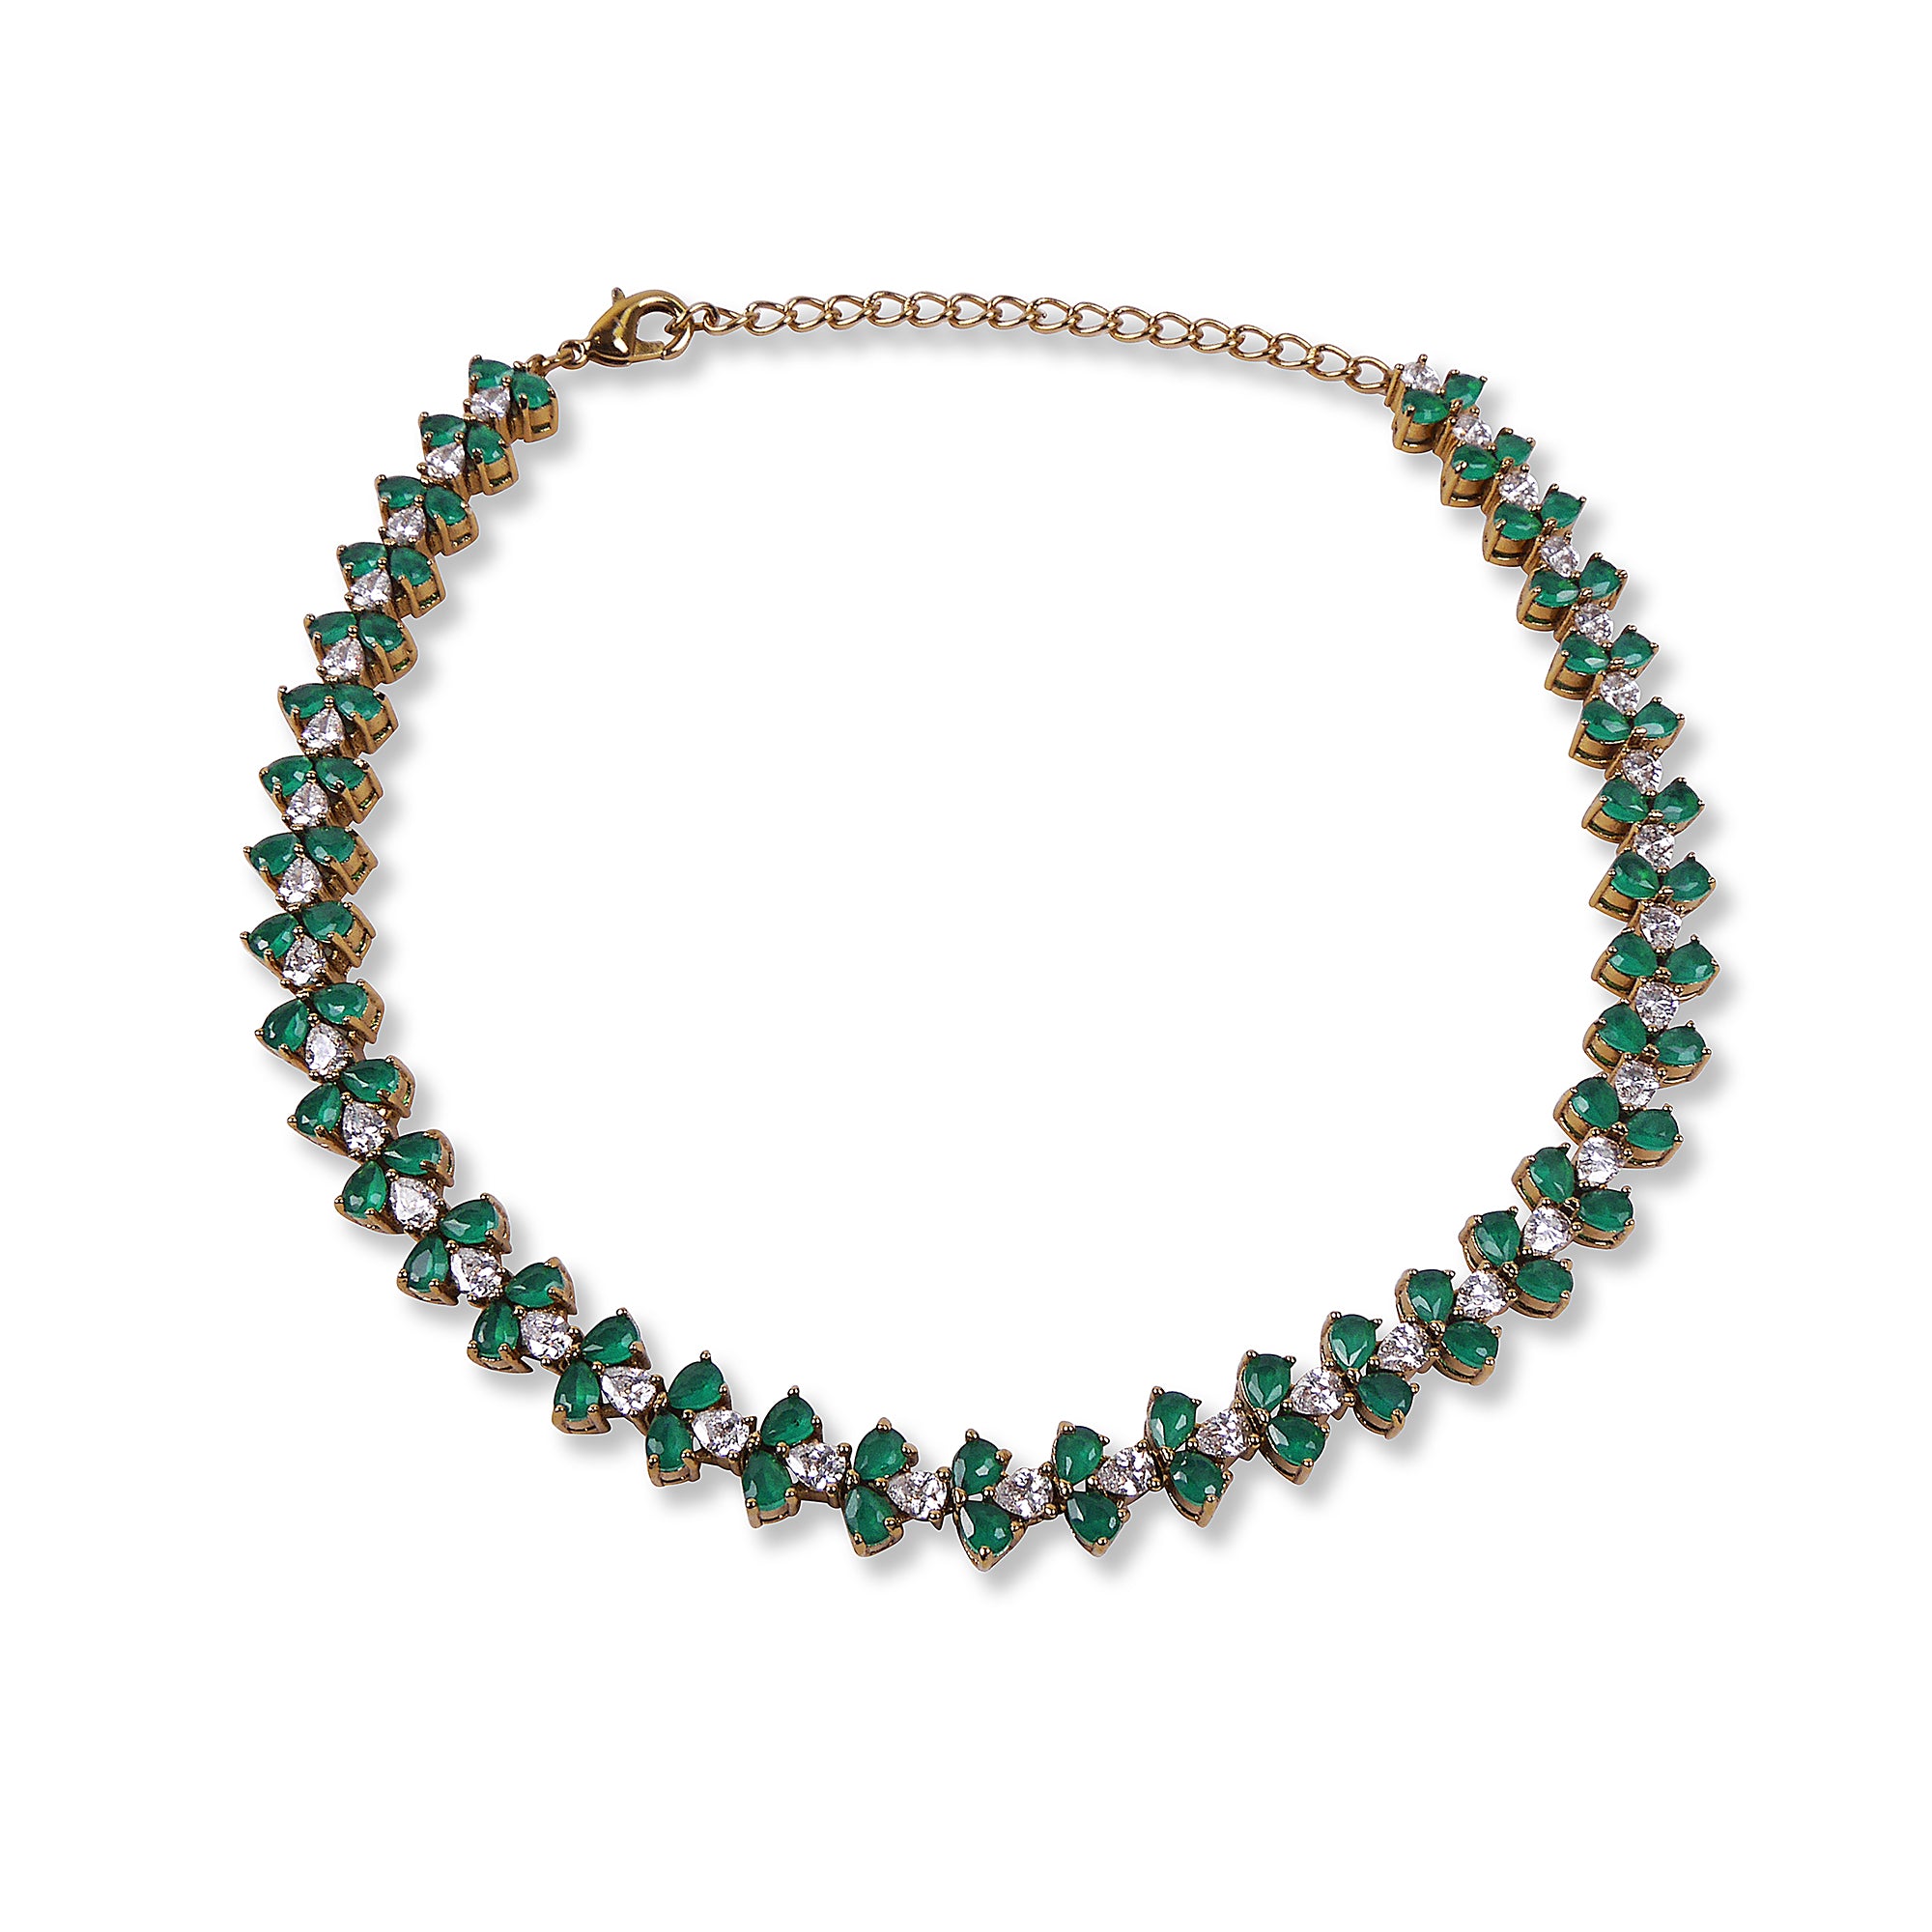 Edith Cubic Zironia Anklet in Green